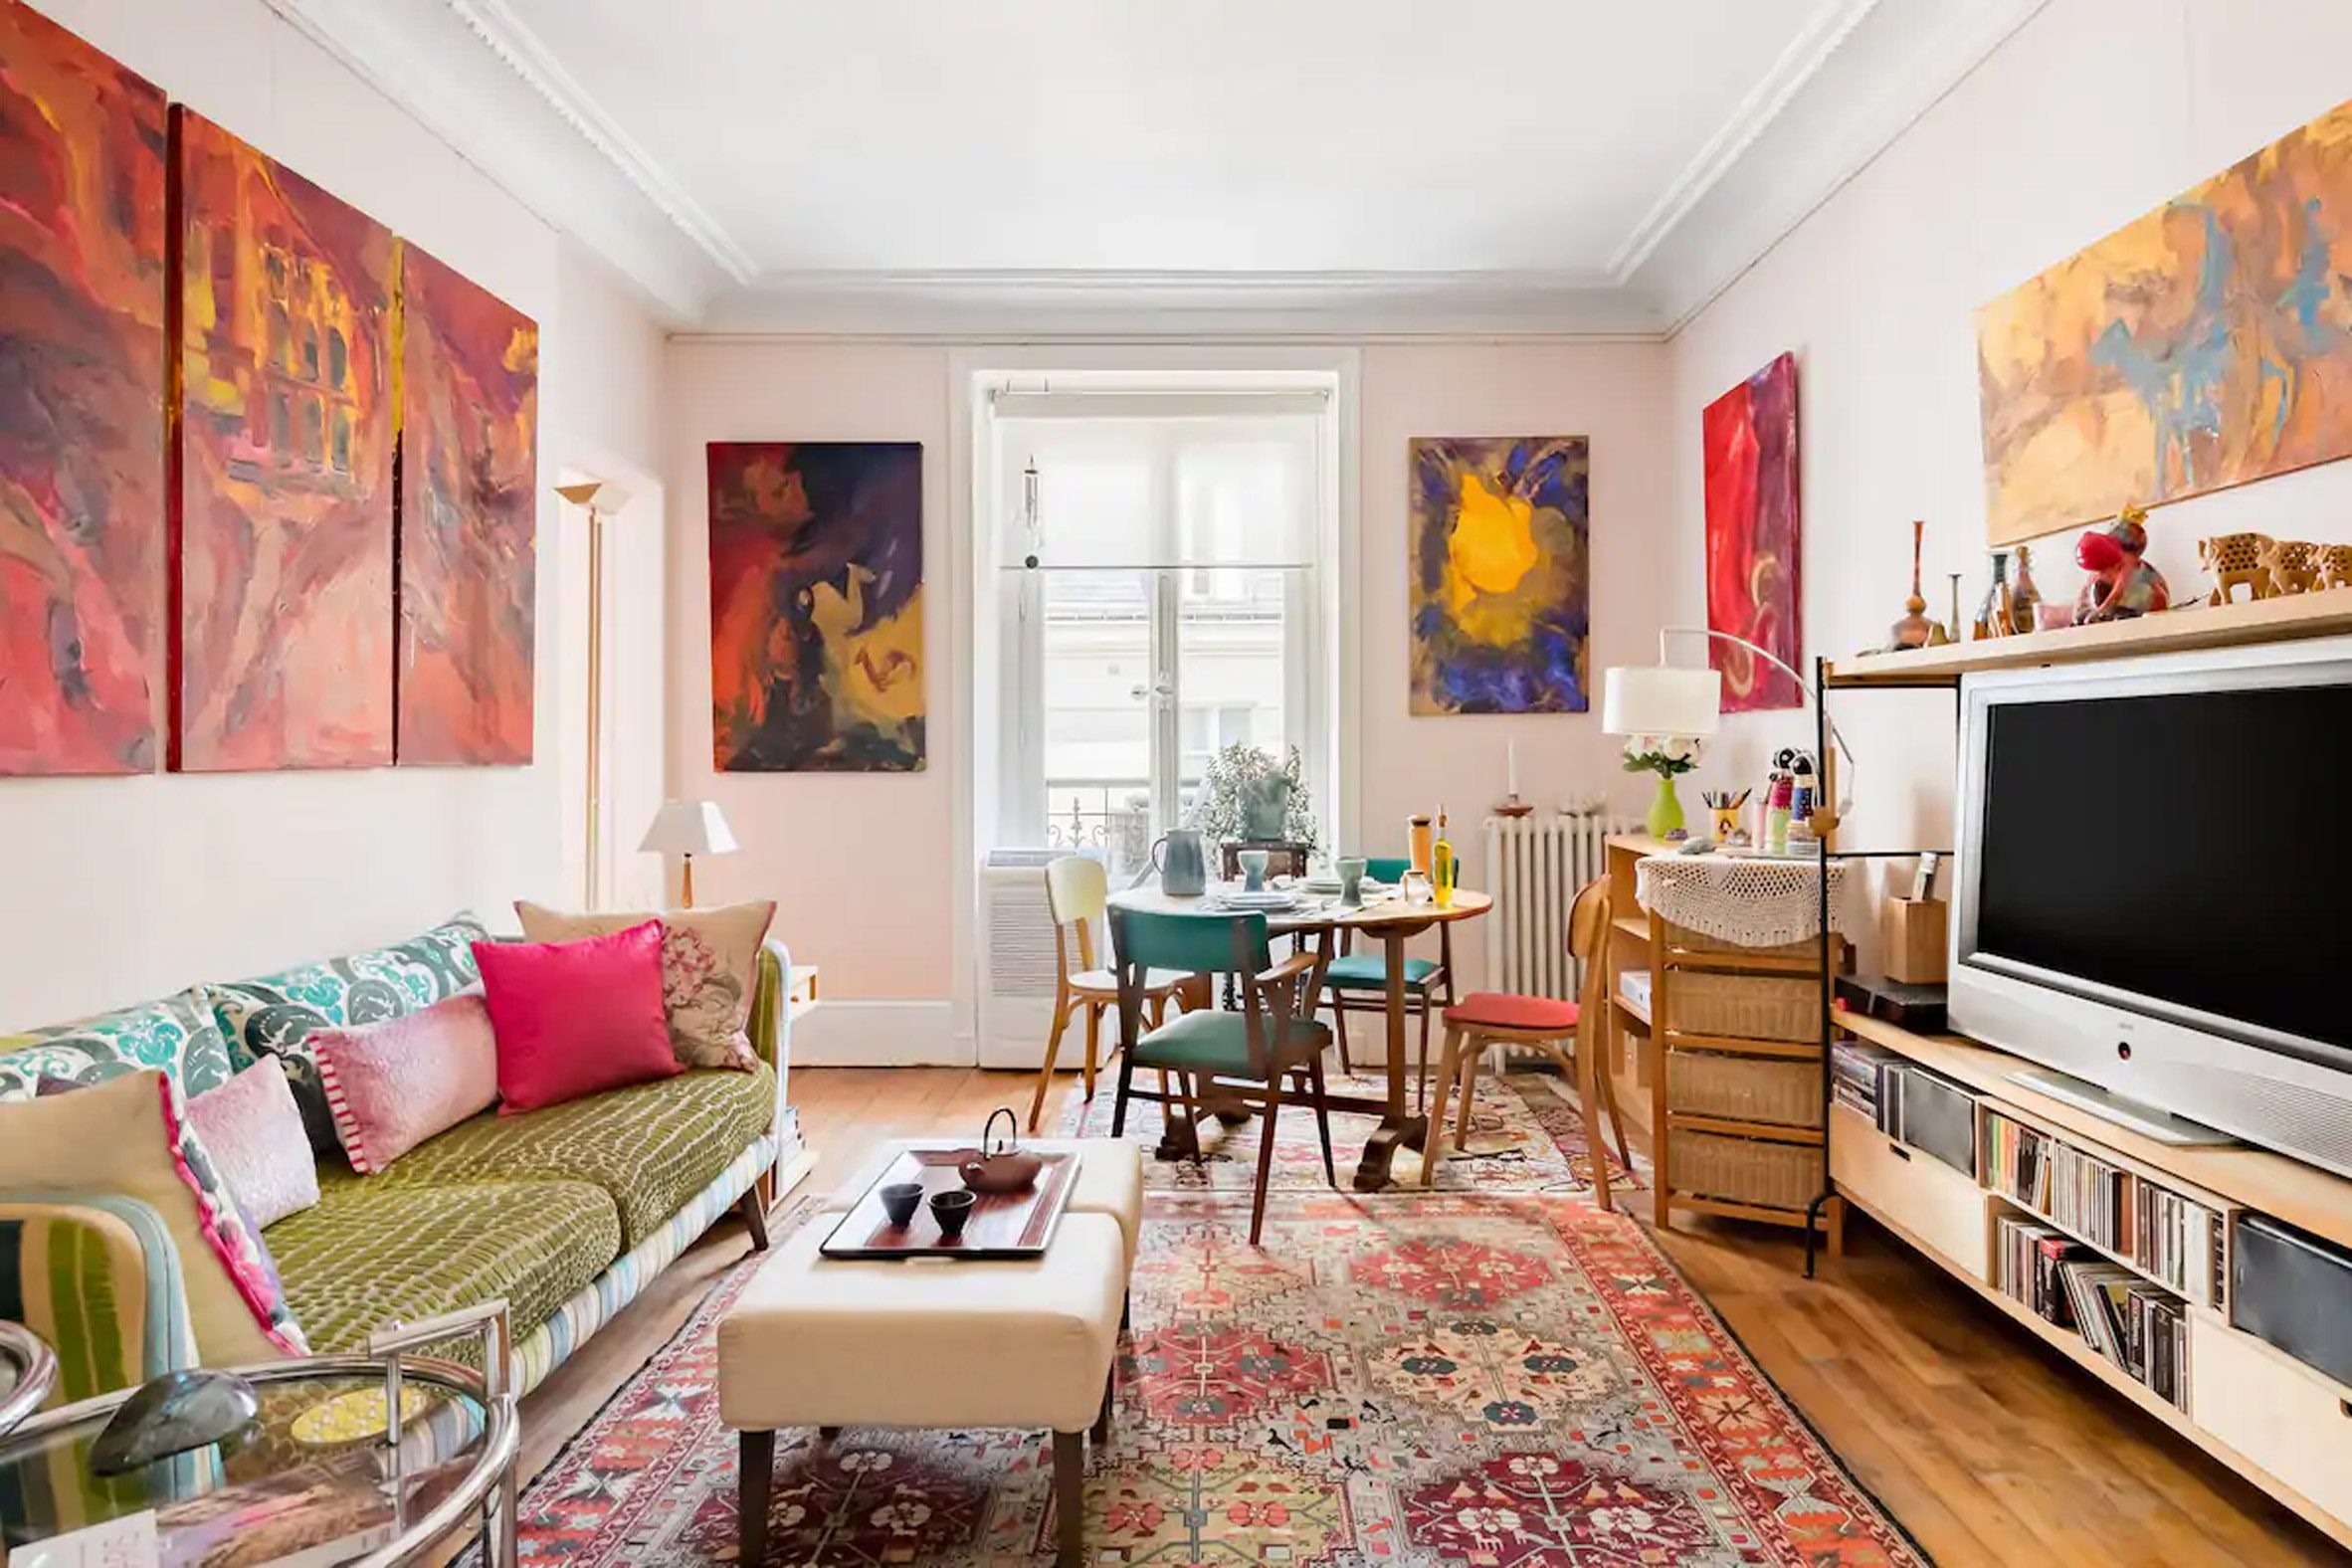  Parisian apartment listed on Airbnb